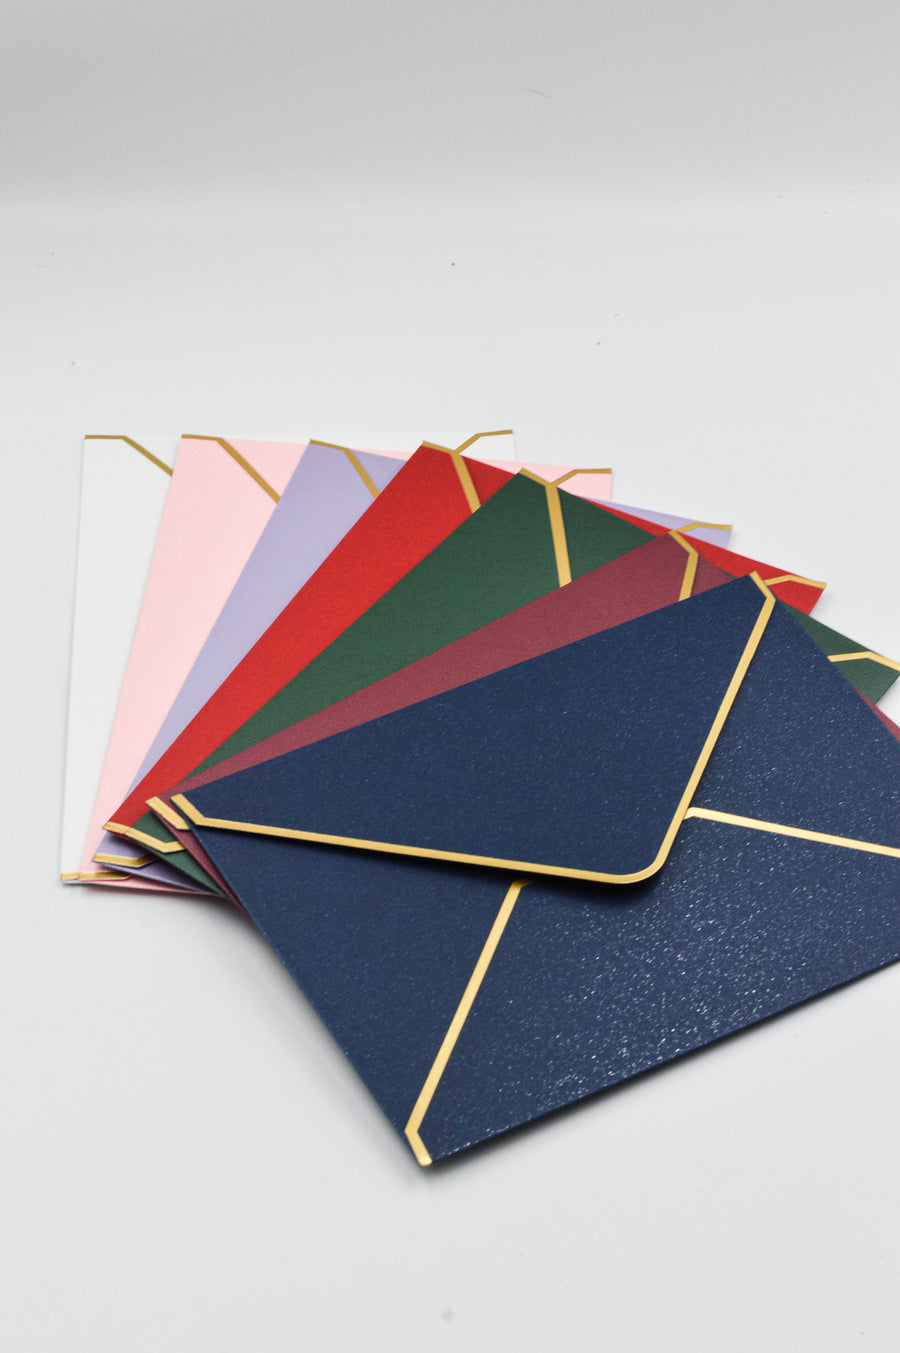 Midnight Blue Envelope with Gold Details